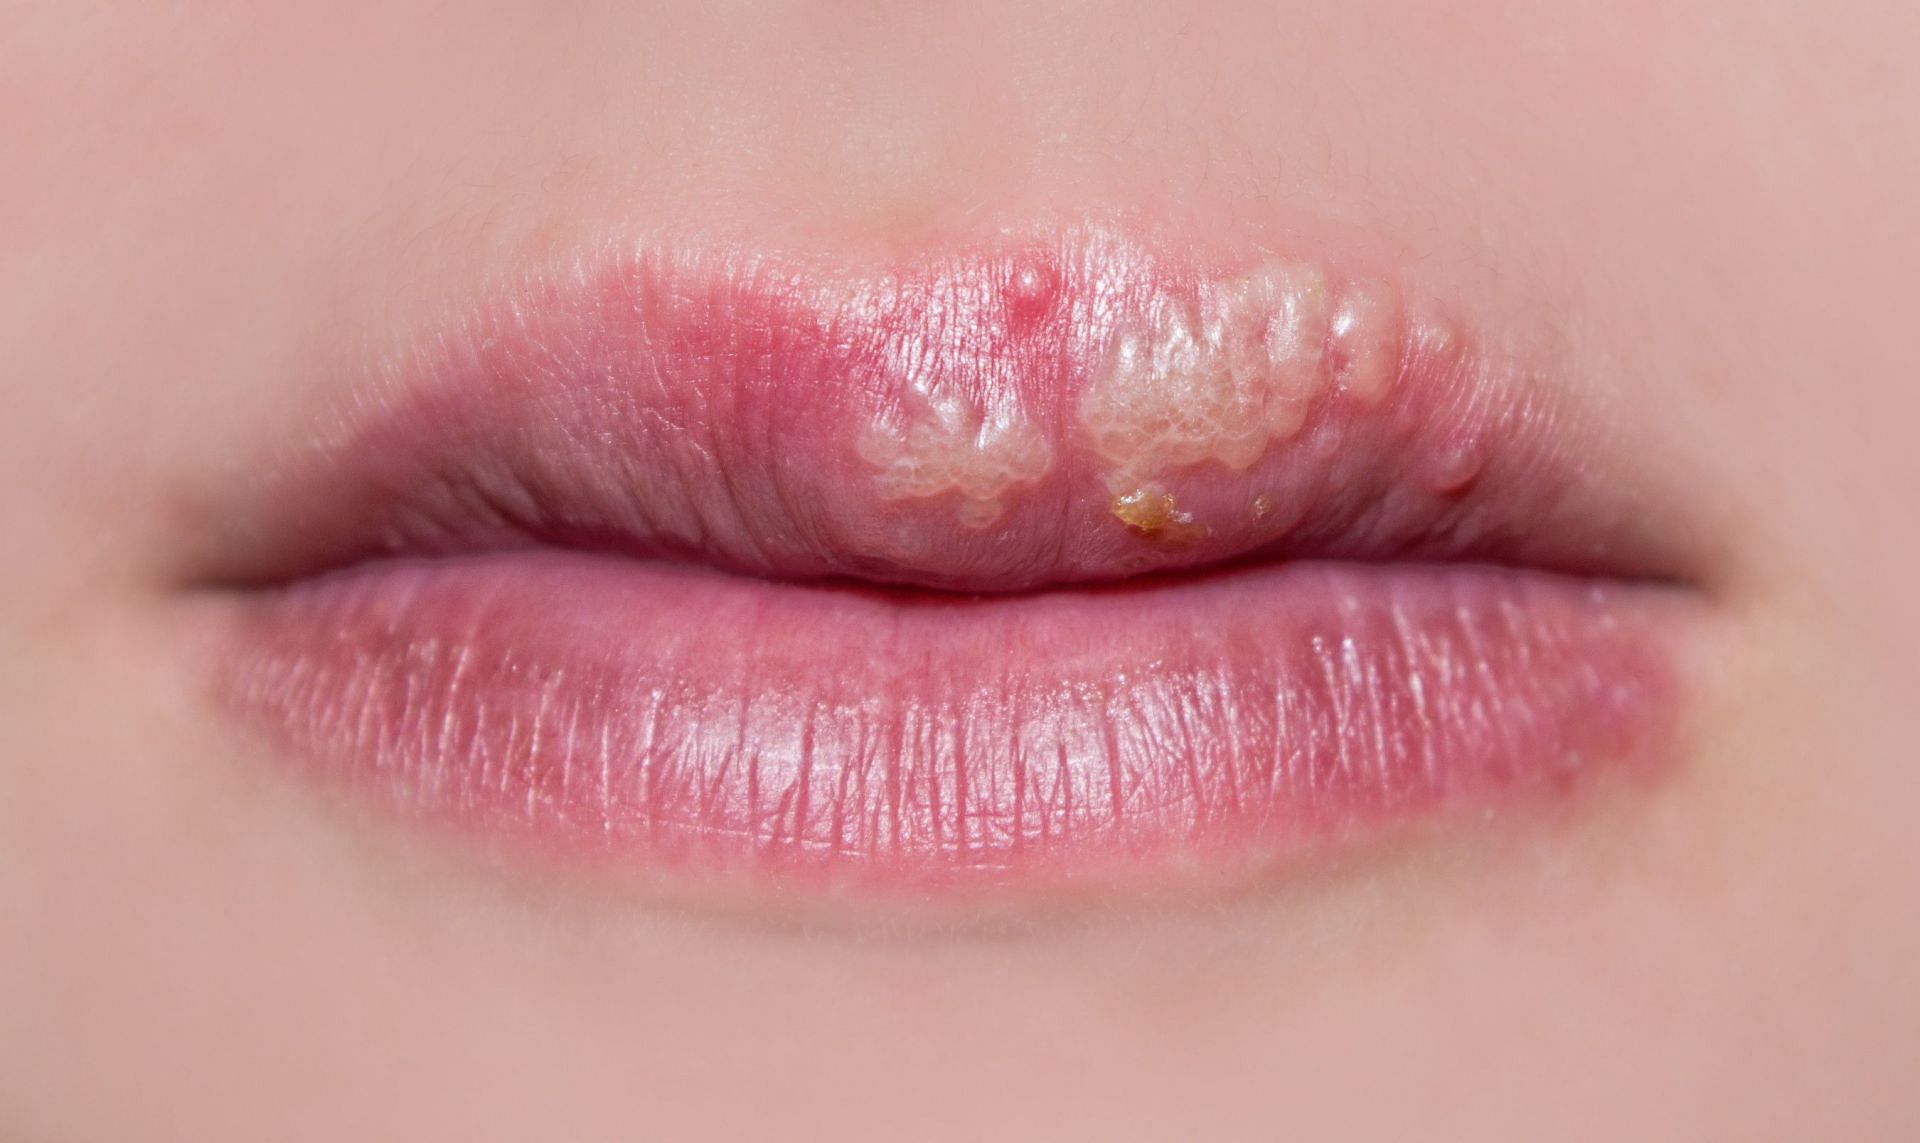 Want to get rid of cold sores? Try these natural remedies for cold sores. (Image via MeMD.com)